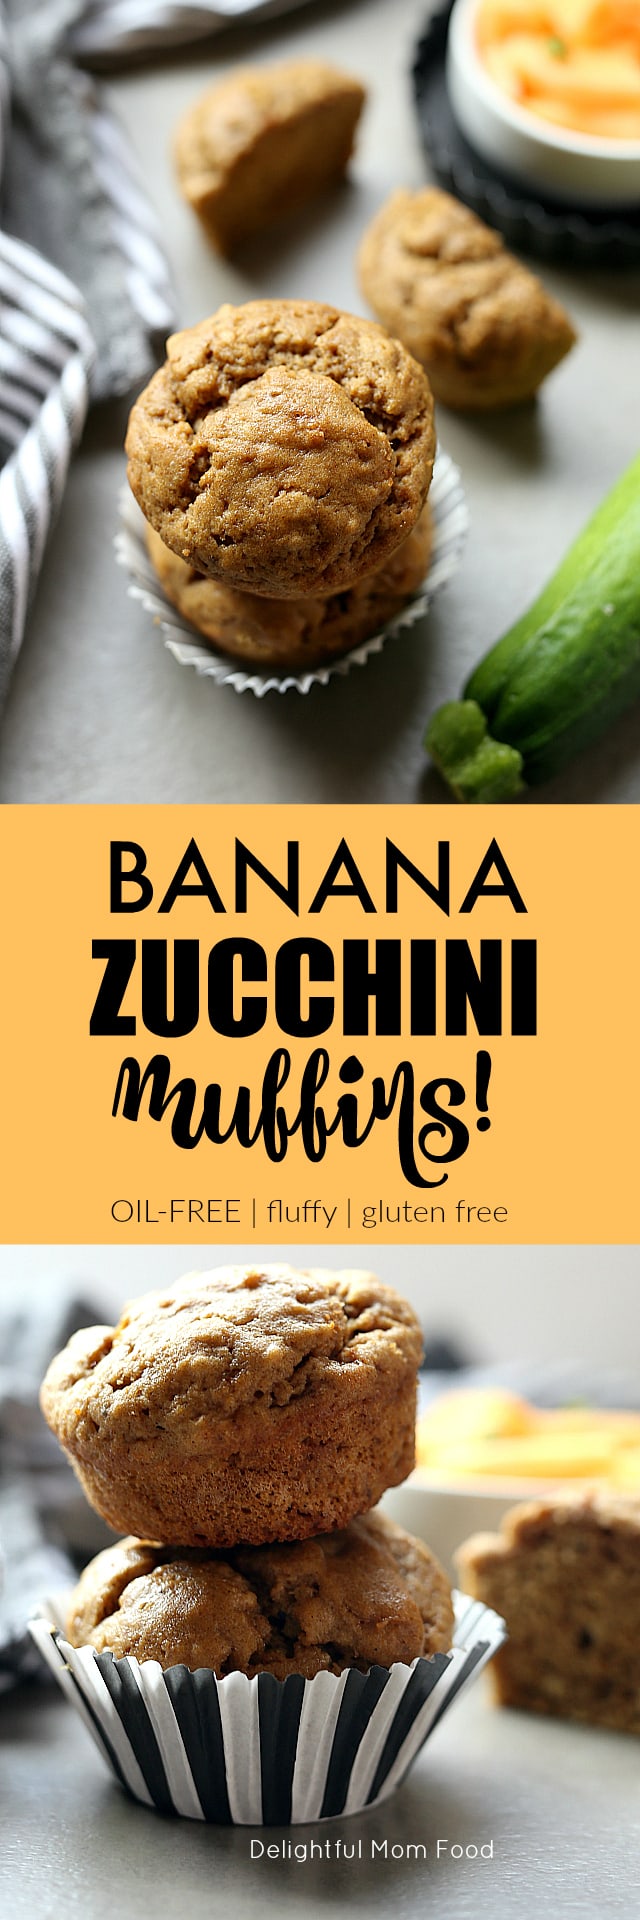 Best and healthy banana zucchini muffins! Gluten free, nut free, dairy free and no need to grate the zucchini. Just throw wet ingredients in the blender!